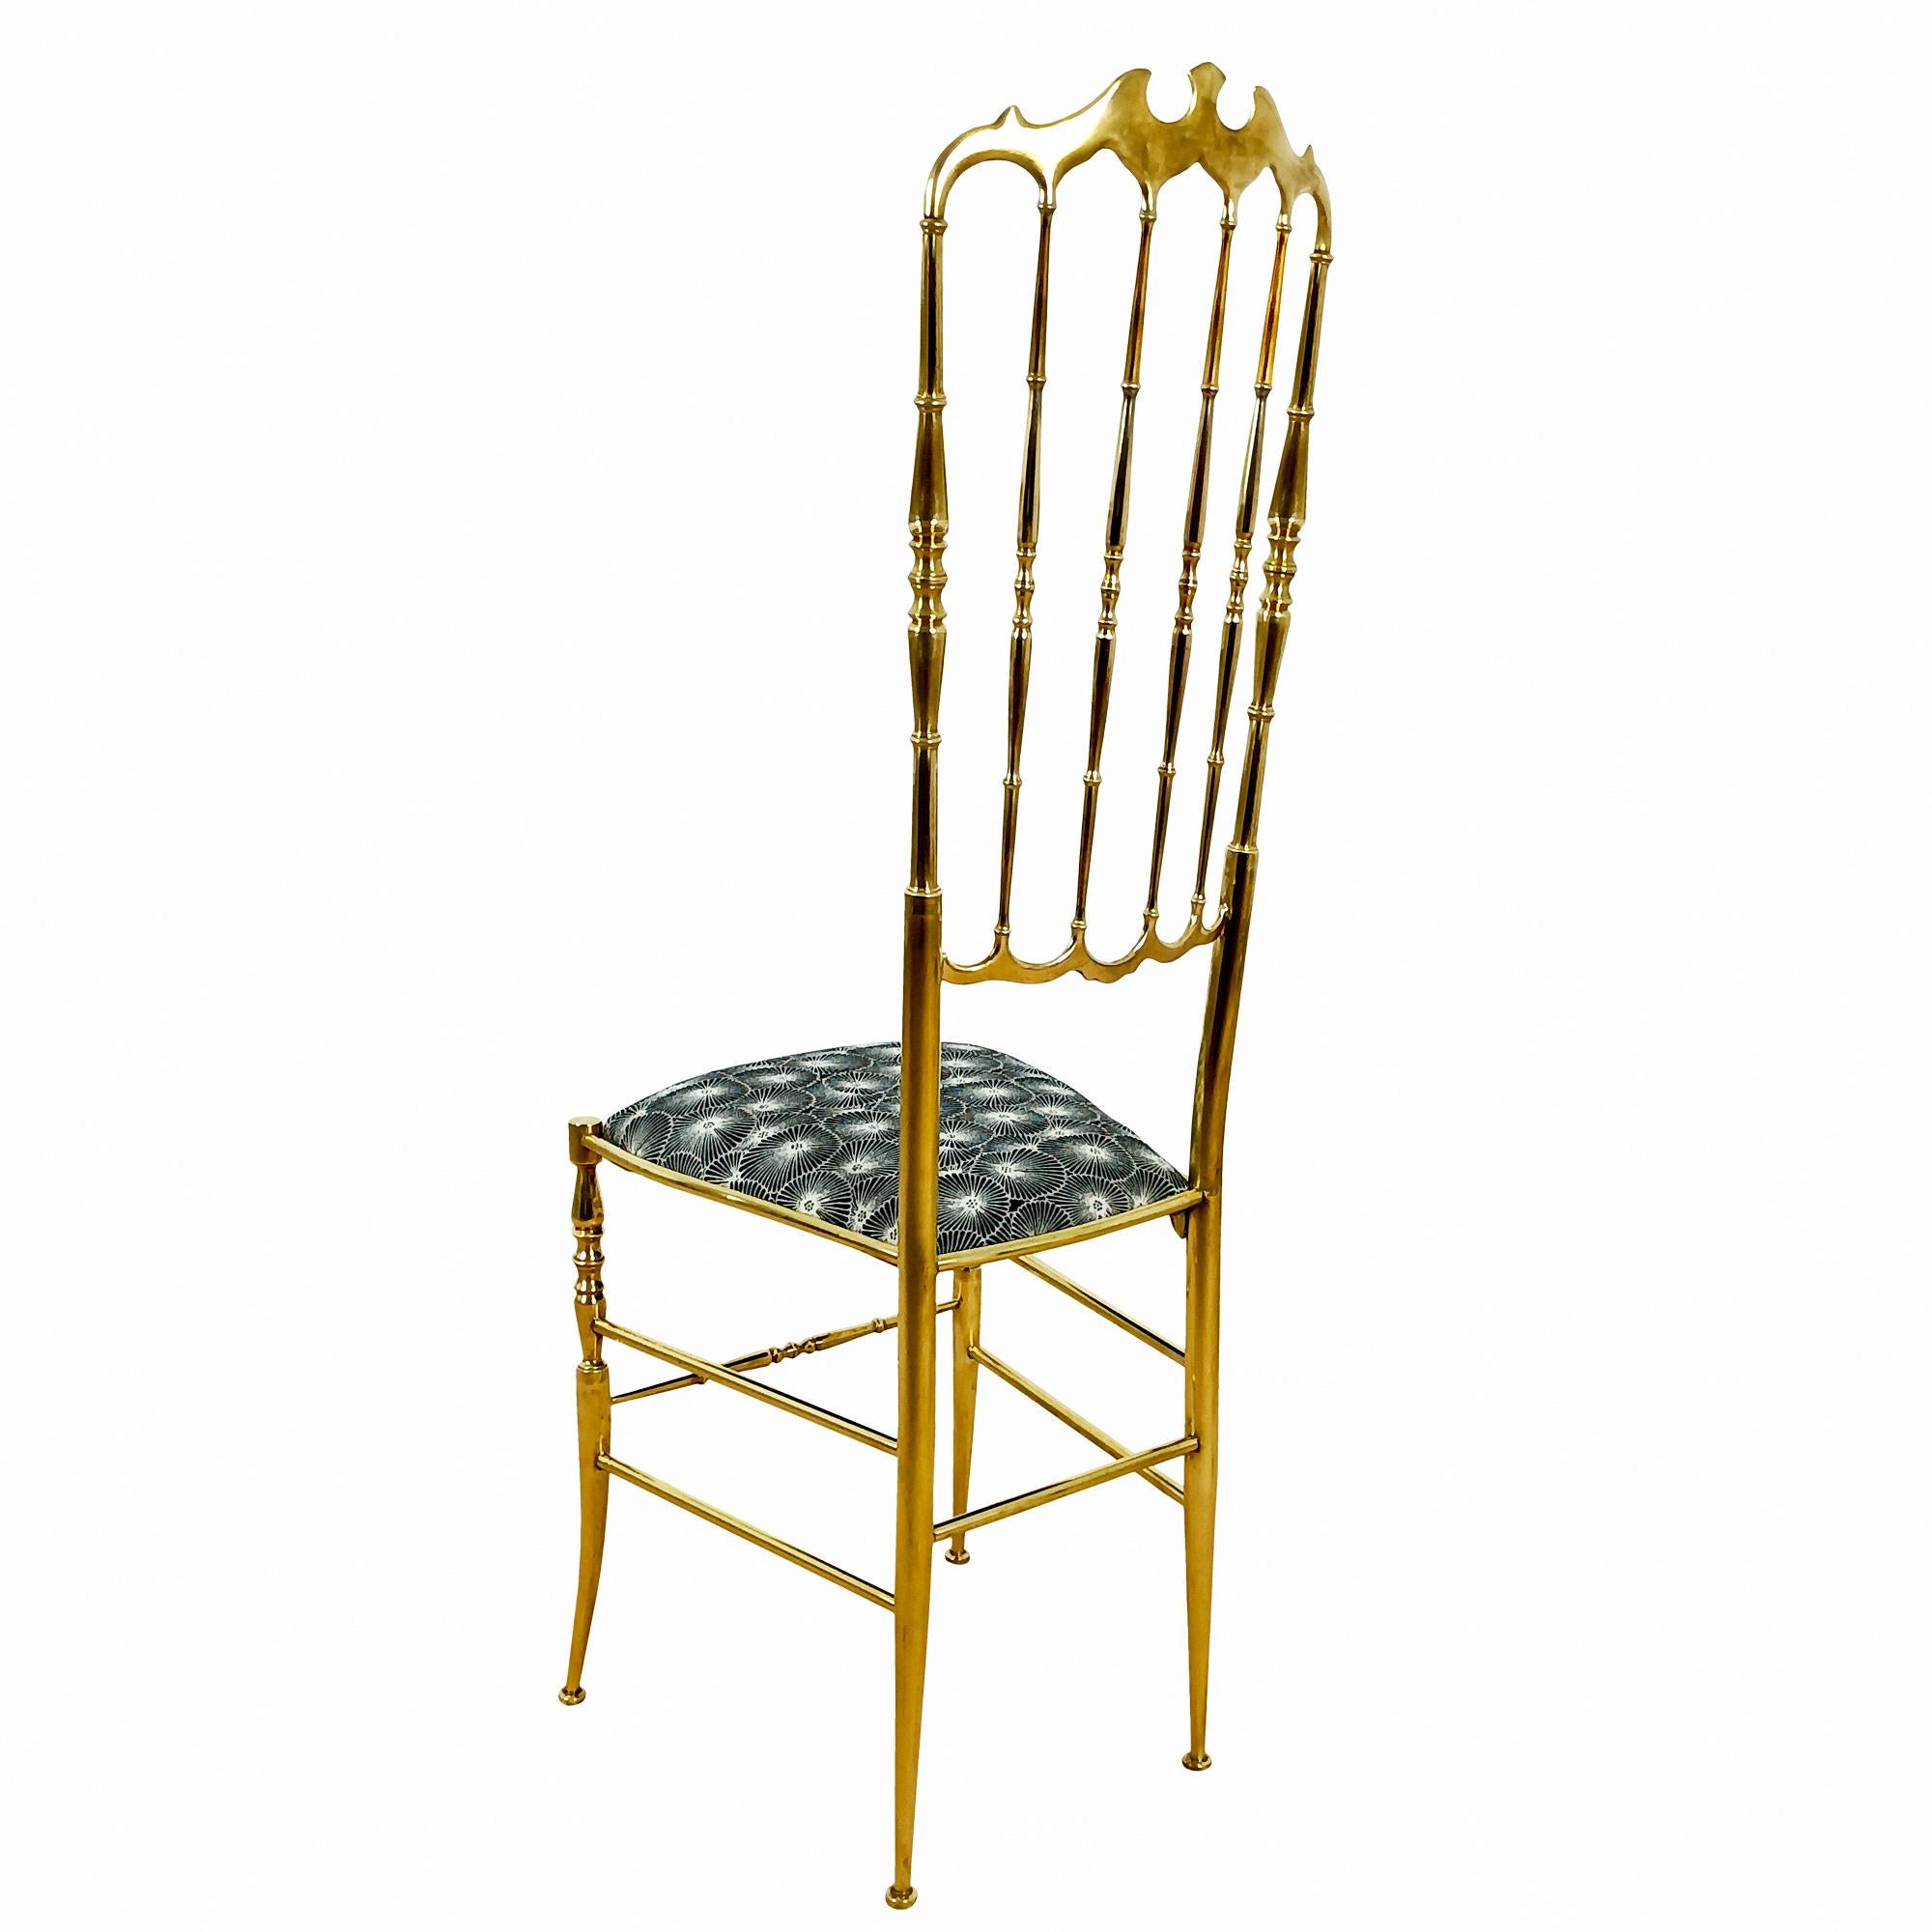 Pair of Mid-Century Modern Chiavari Chairs with Japanese Fabric, Italy, 1940 In Good Condition For Sale In Girona, ES